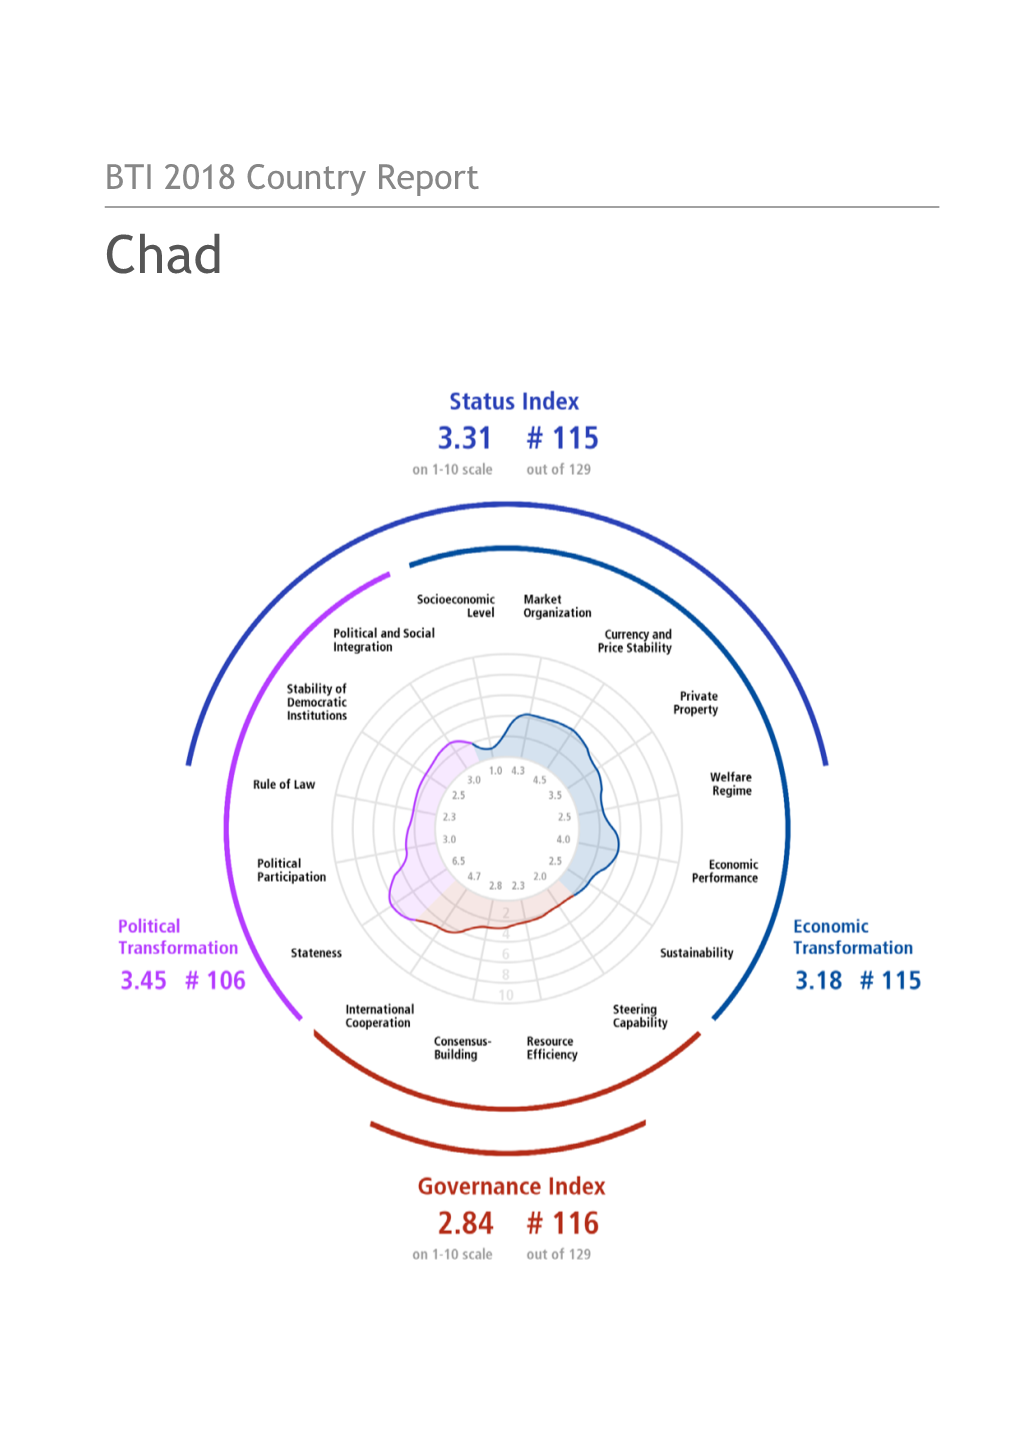 BTI 2018 Country Report Chad